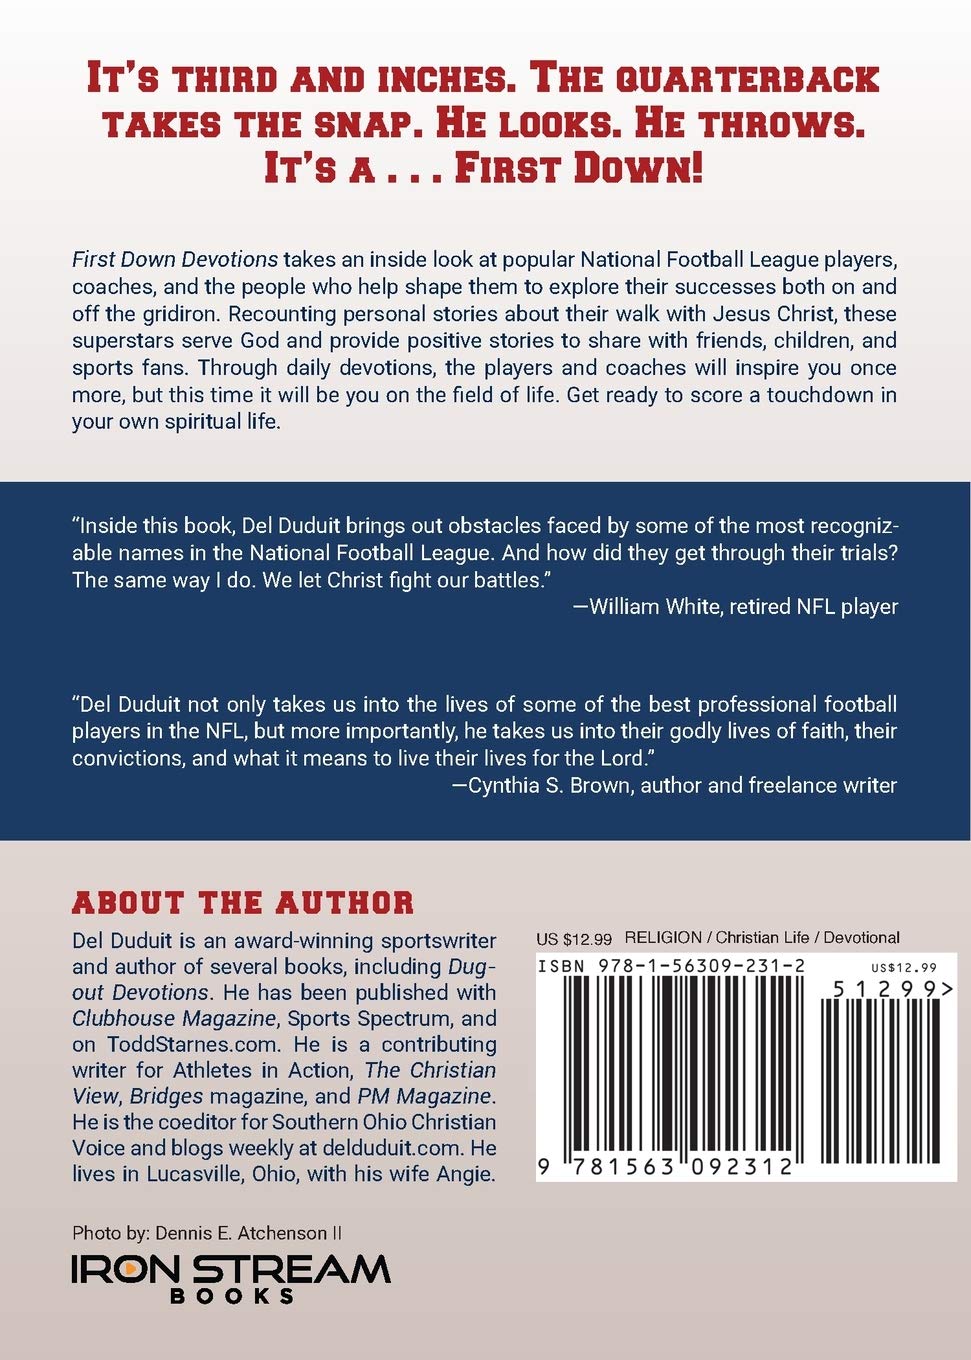 First Down Devotions: Inspiration from the NFL's Best (Stars of the Faith, 2) Paperback – August 5, 2019